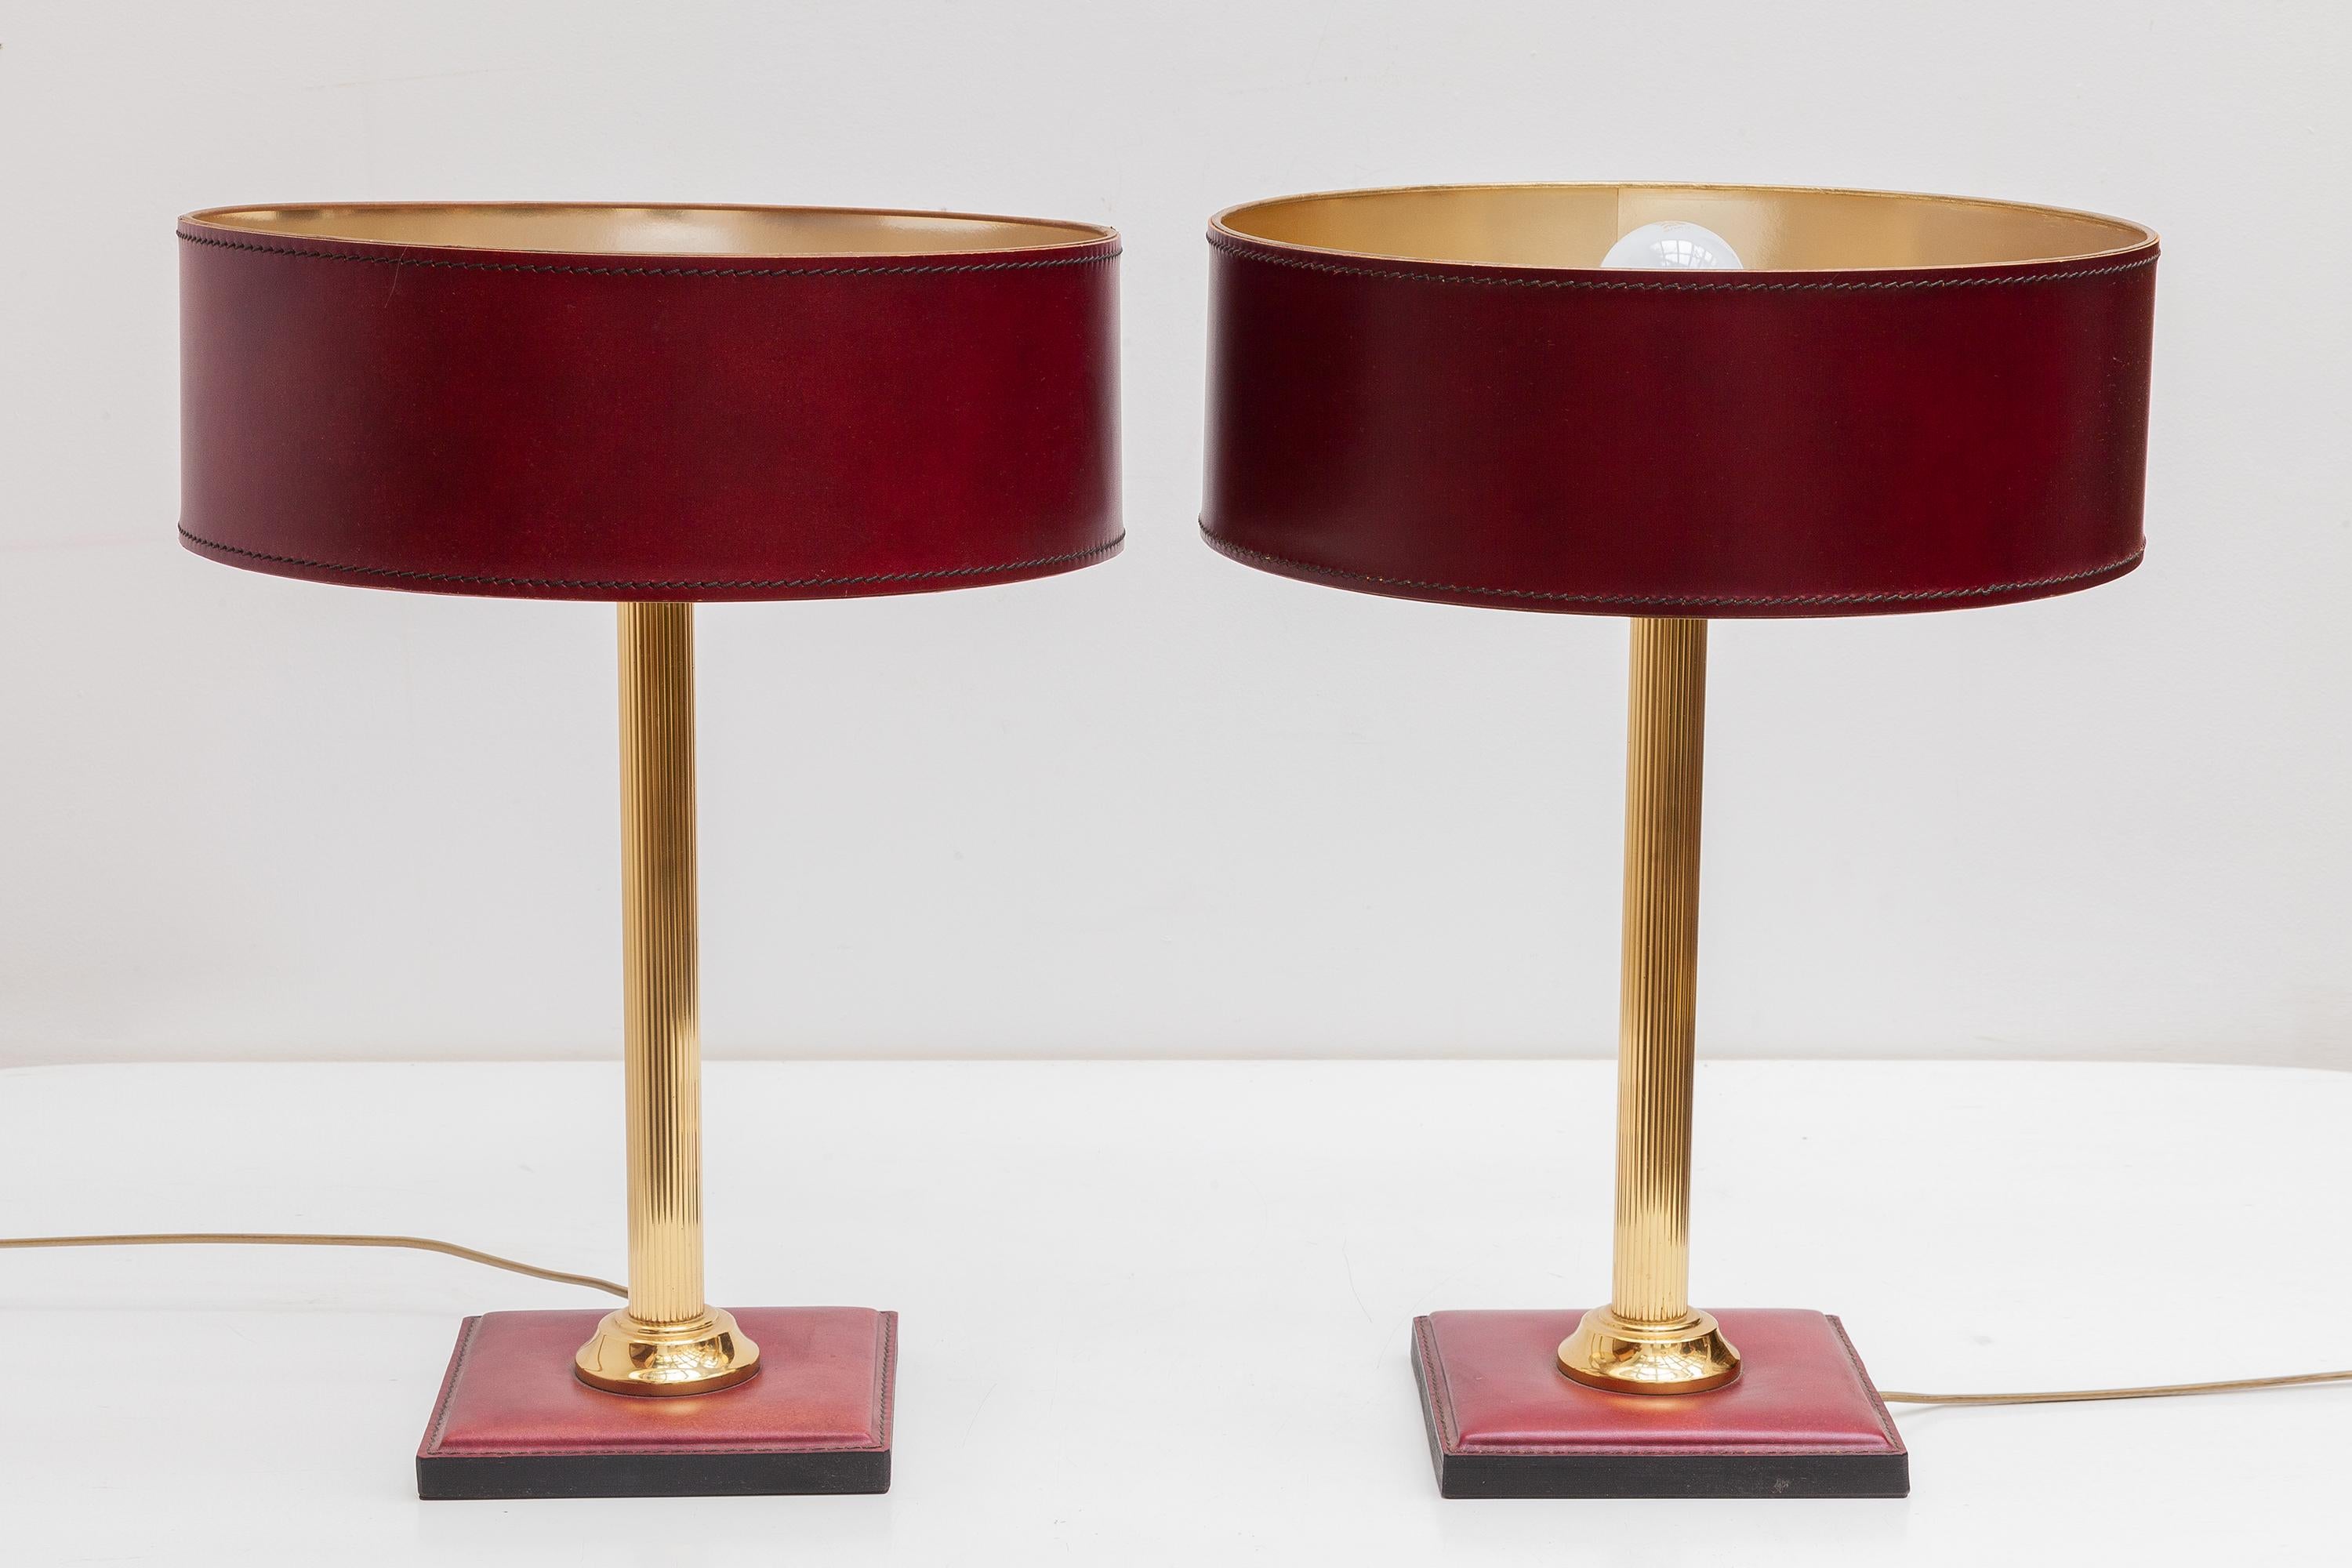 Set of two decorative table lamps in red leather attributed design by Jacques Adnet, France 1960. These leather clad table lamps has a square base and a brass stem with very nice hand-stitched shades in red leather. Beautiful in contrast with the